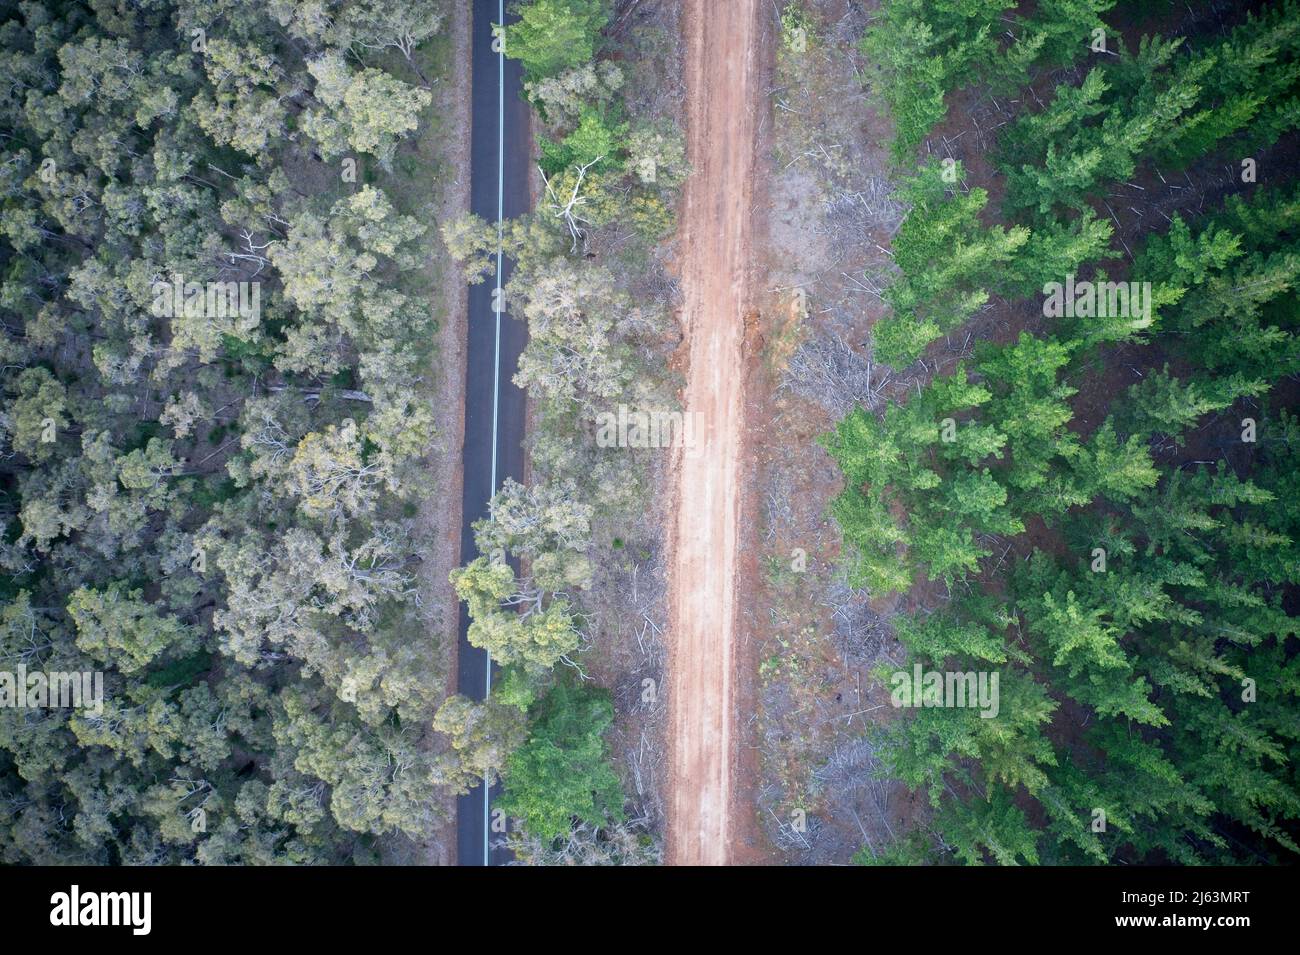 Drone field of view of pine forest and roads forming patterns in nature in Western Australia. Stock Photo